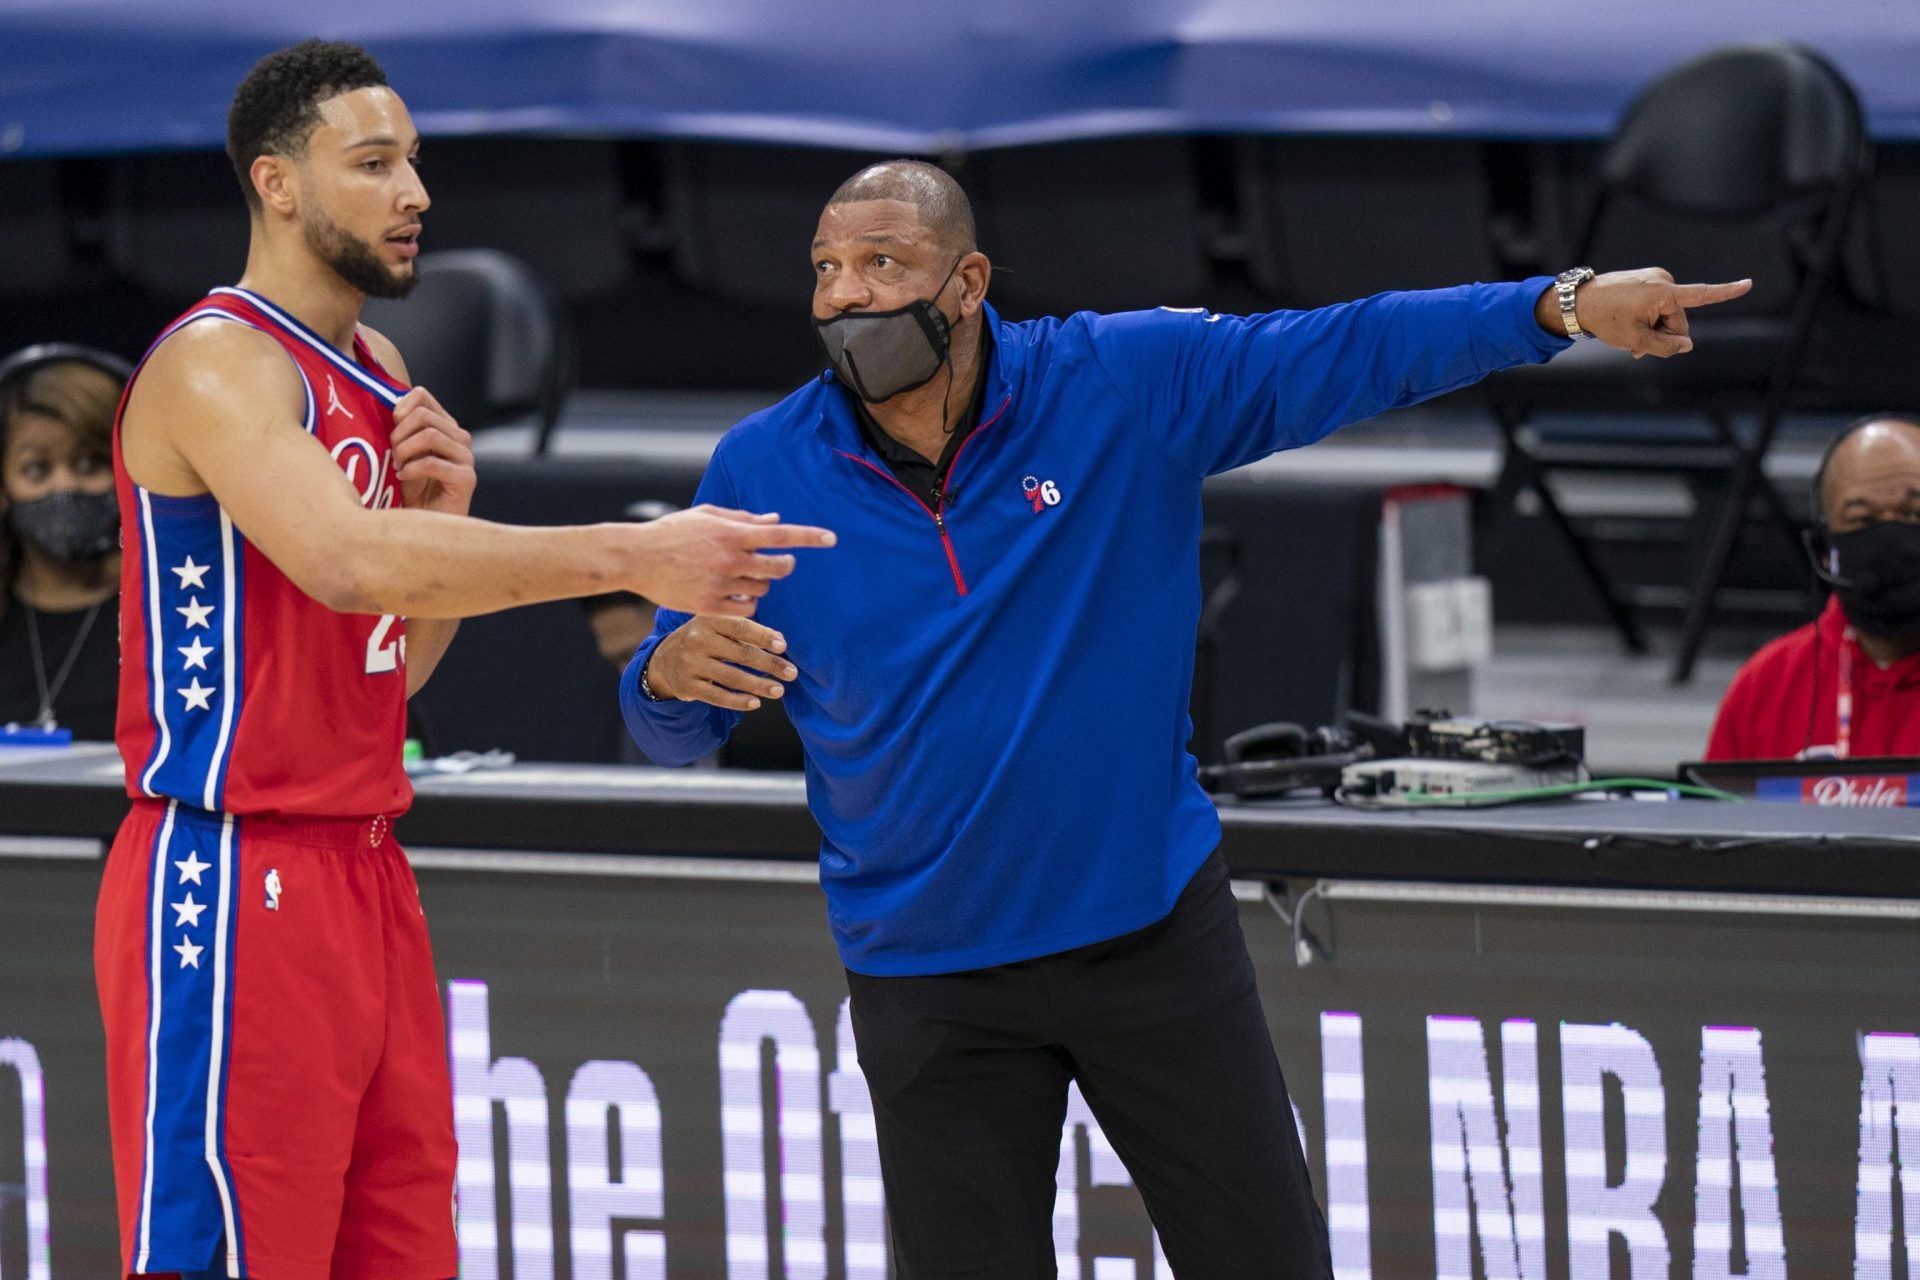 Ben Simmons reportedly wanted 76ers coach Doc Rivers to apologize for his comments